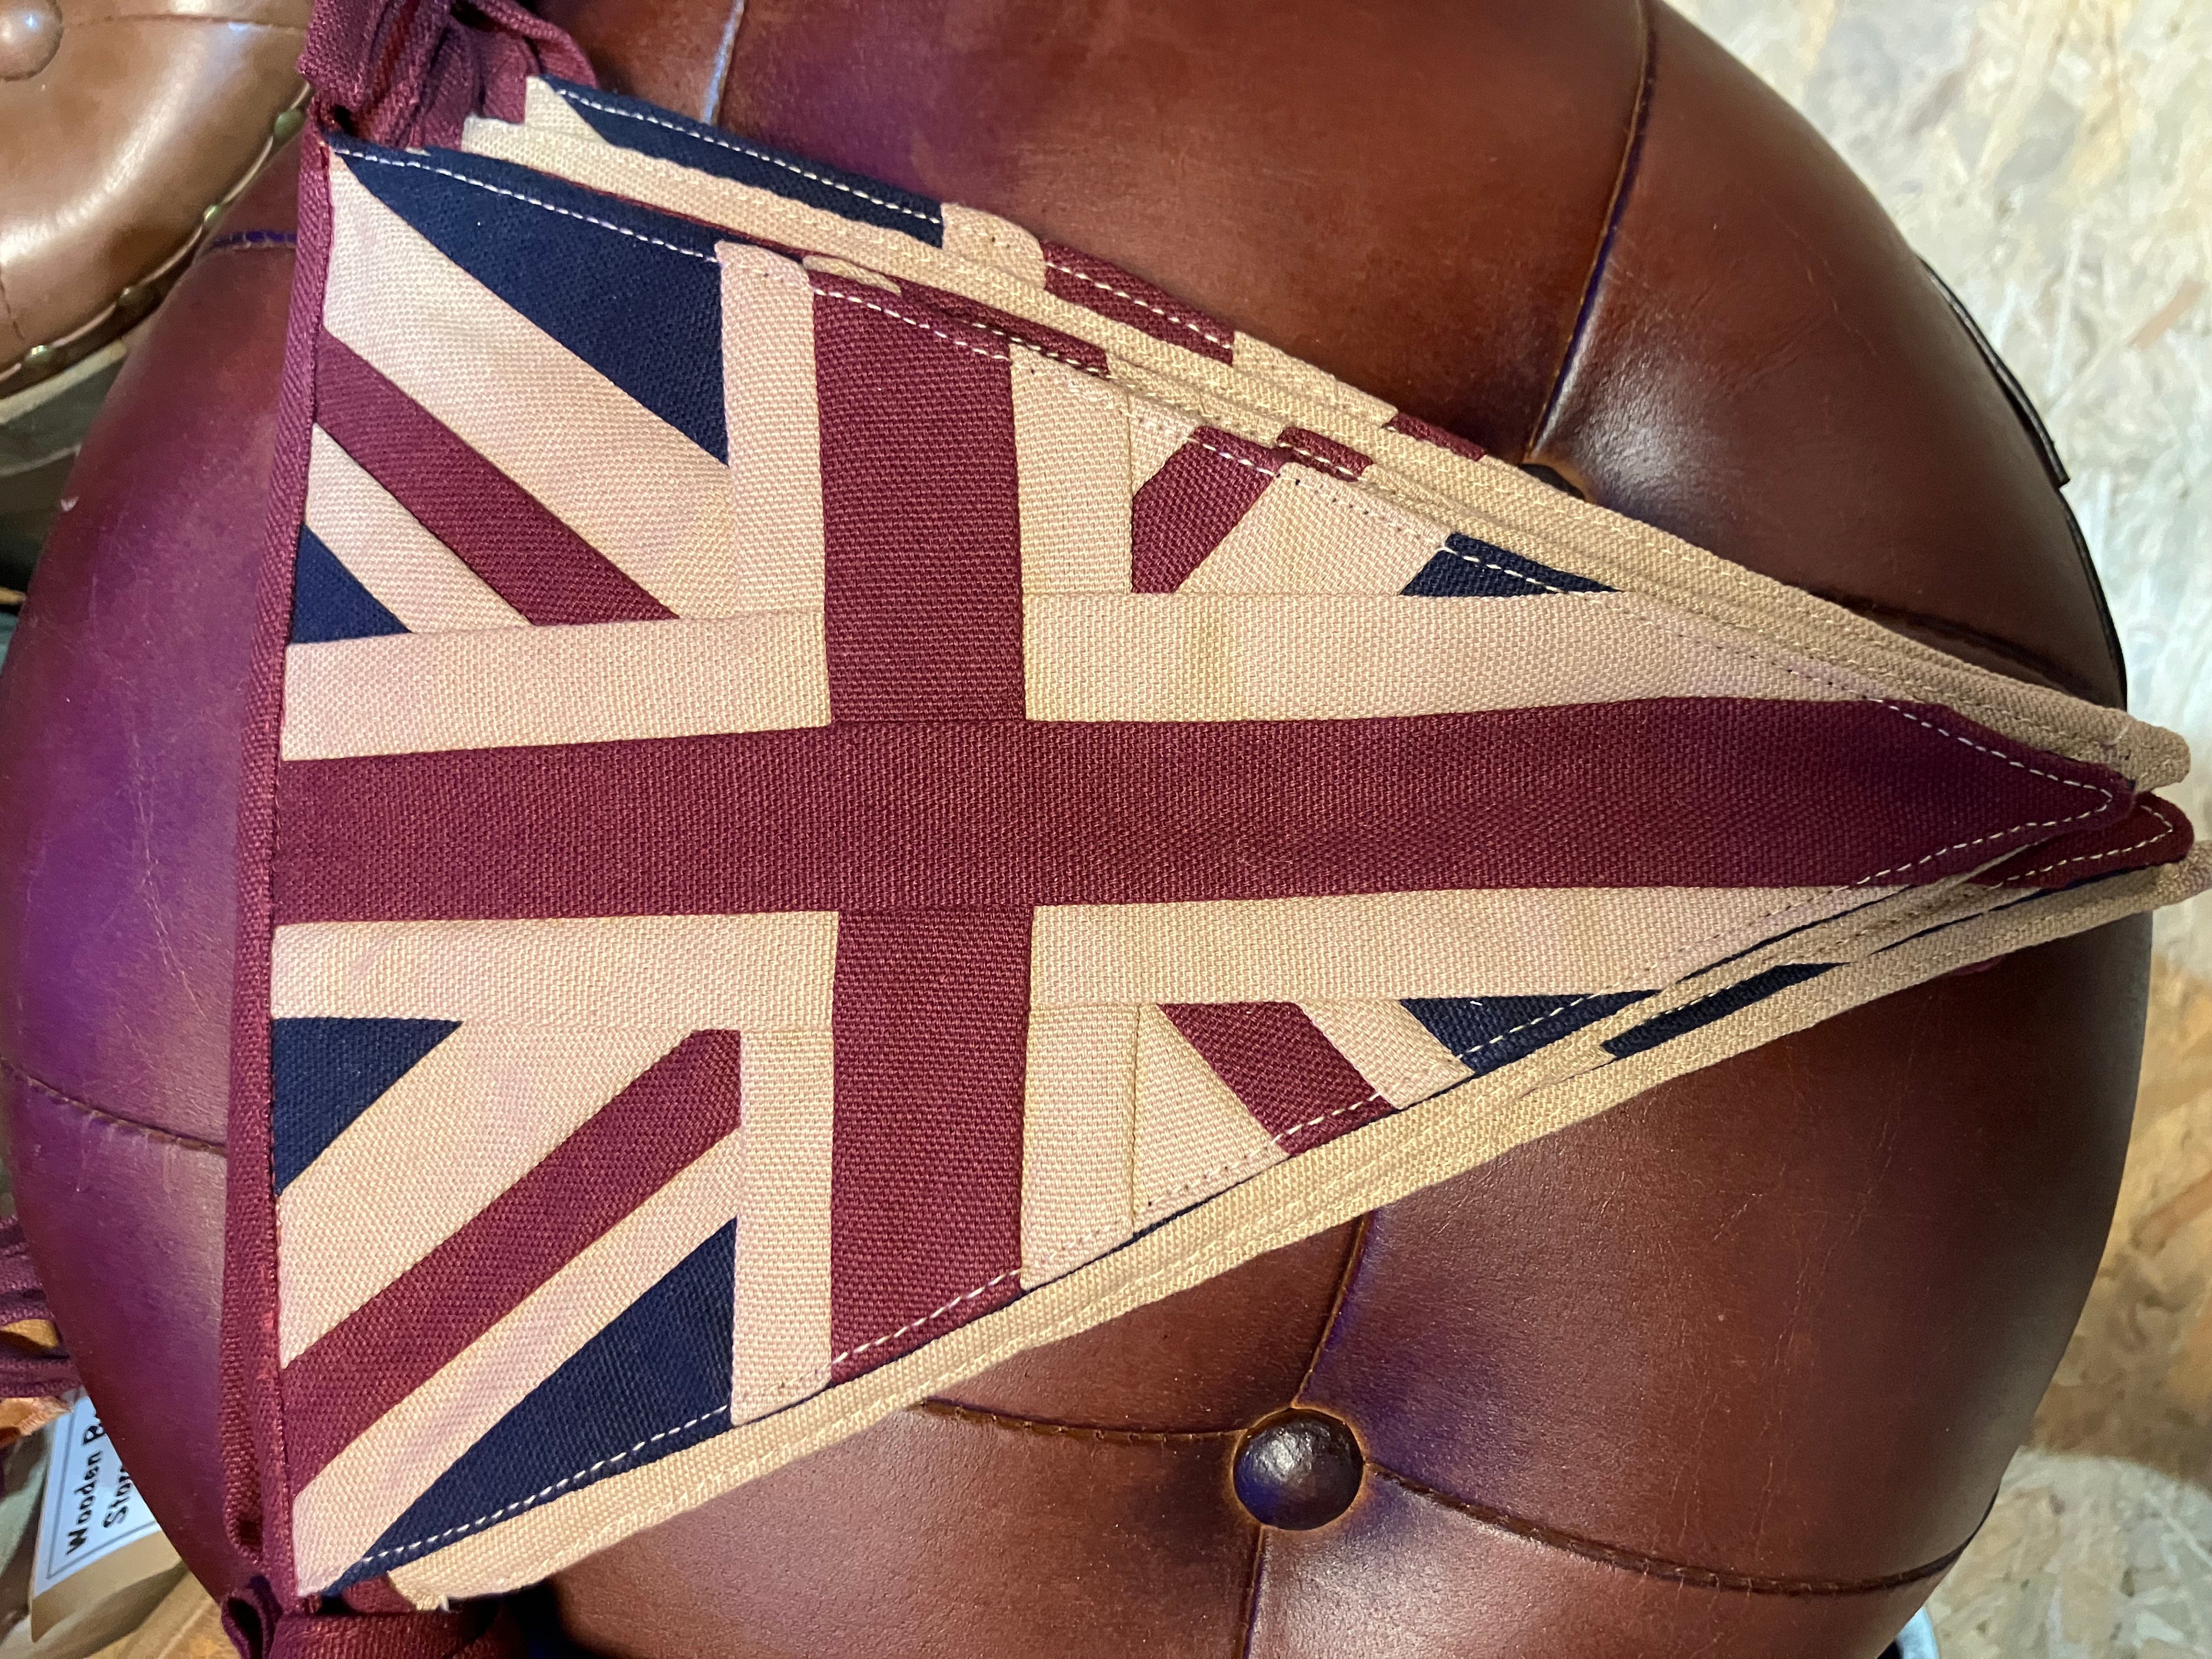 Stunning British Union Jack Quality Bunting Cotton Canvas - Available as Stitched or Printed